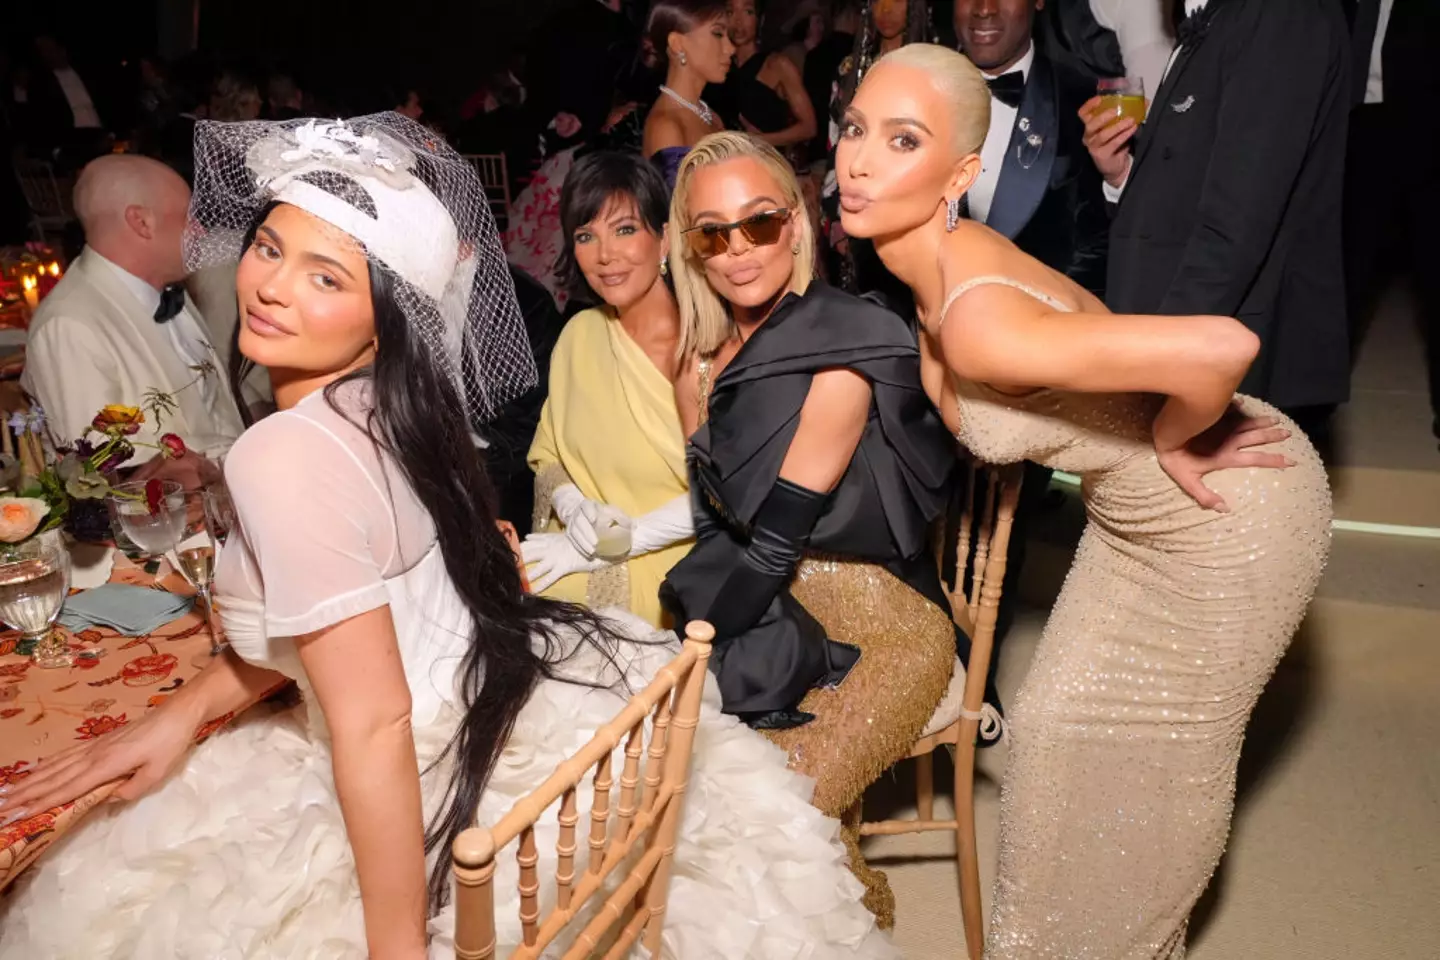 The Kardashian family at the 2022 Met Gala. (Kevin Mazur/MG22/Getty Images for The Met Museum/Vogue)